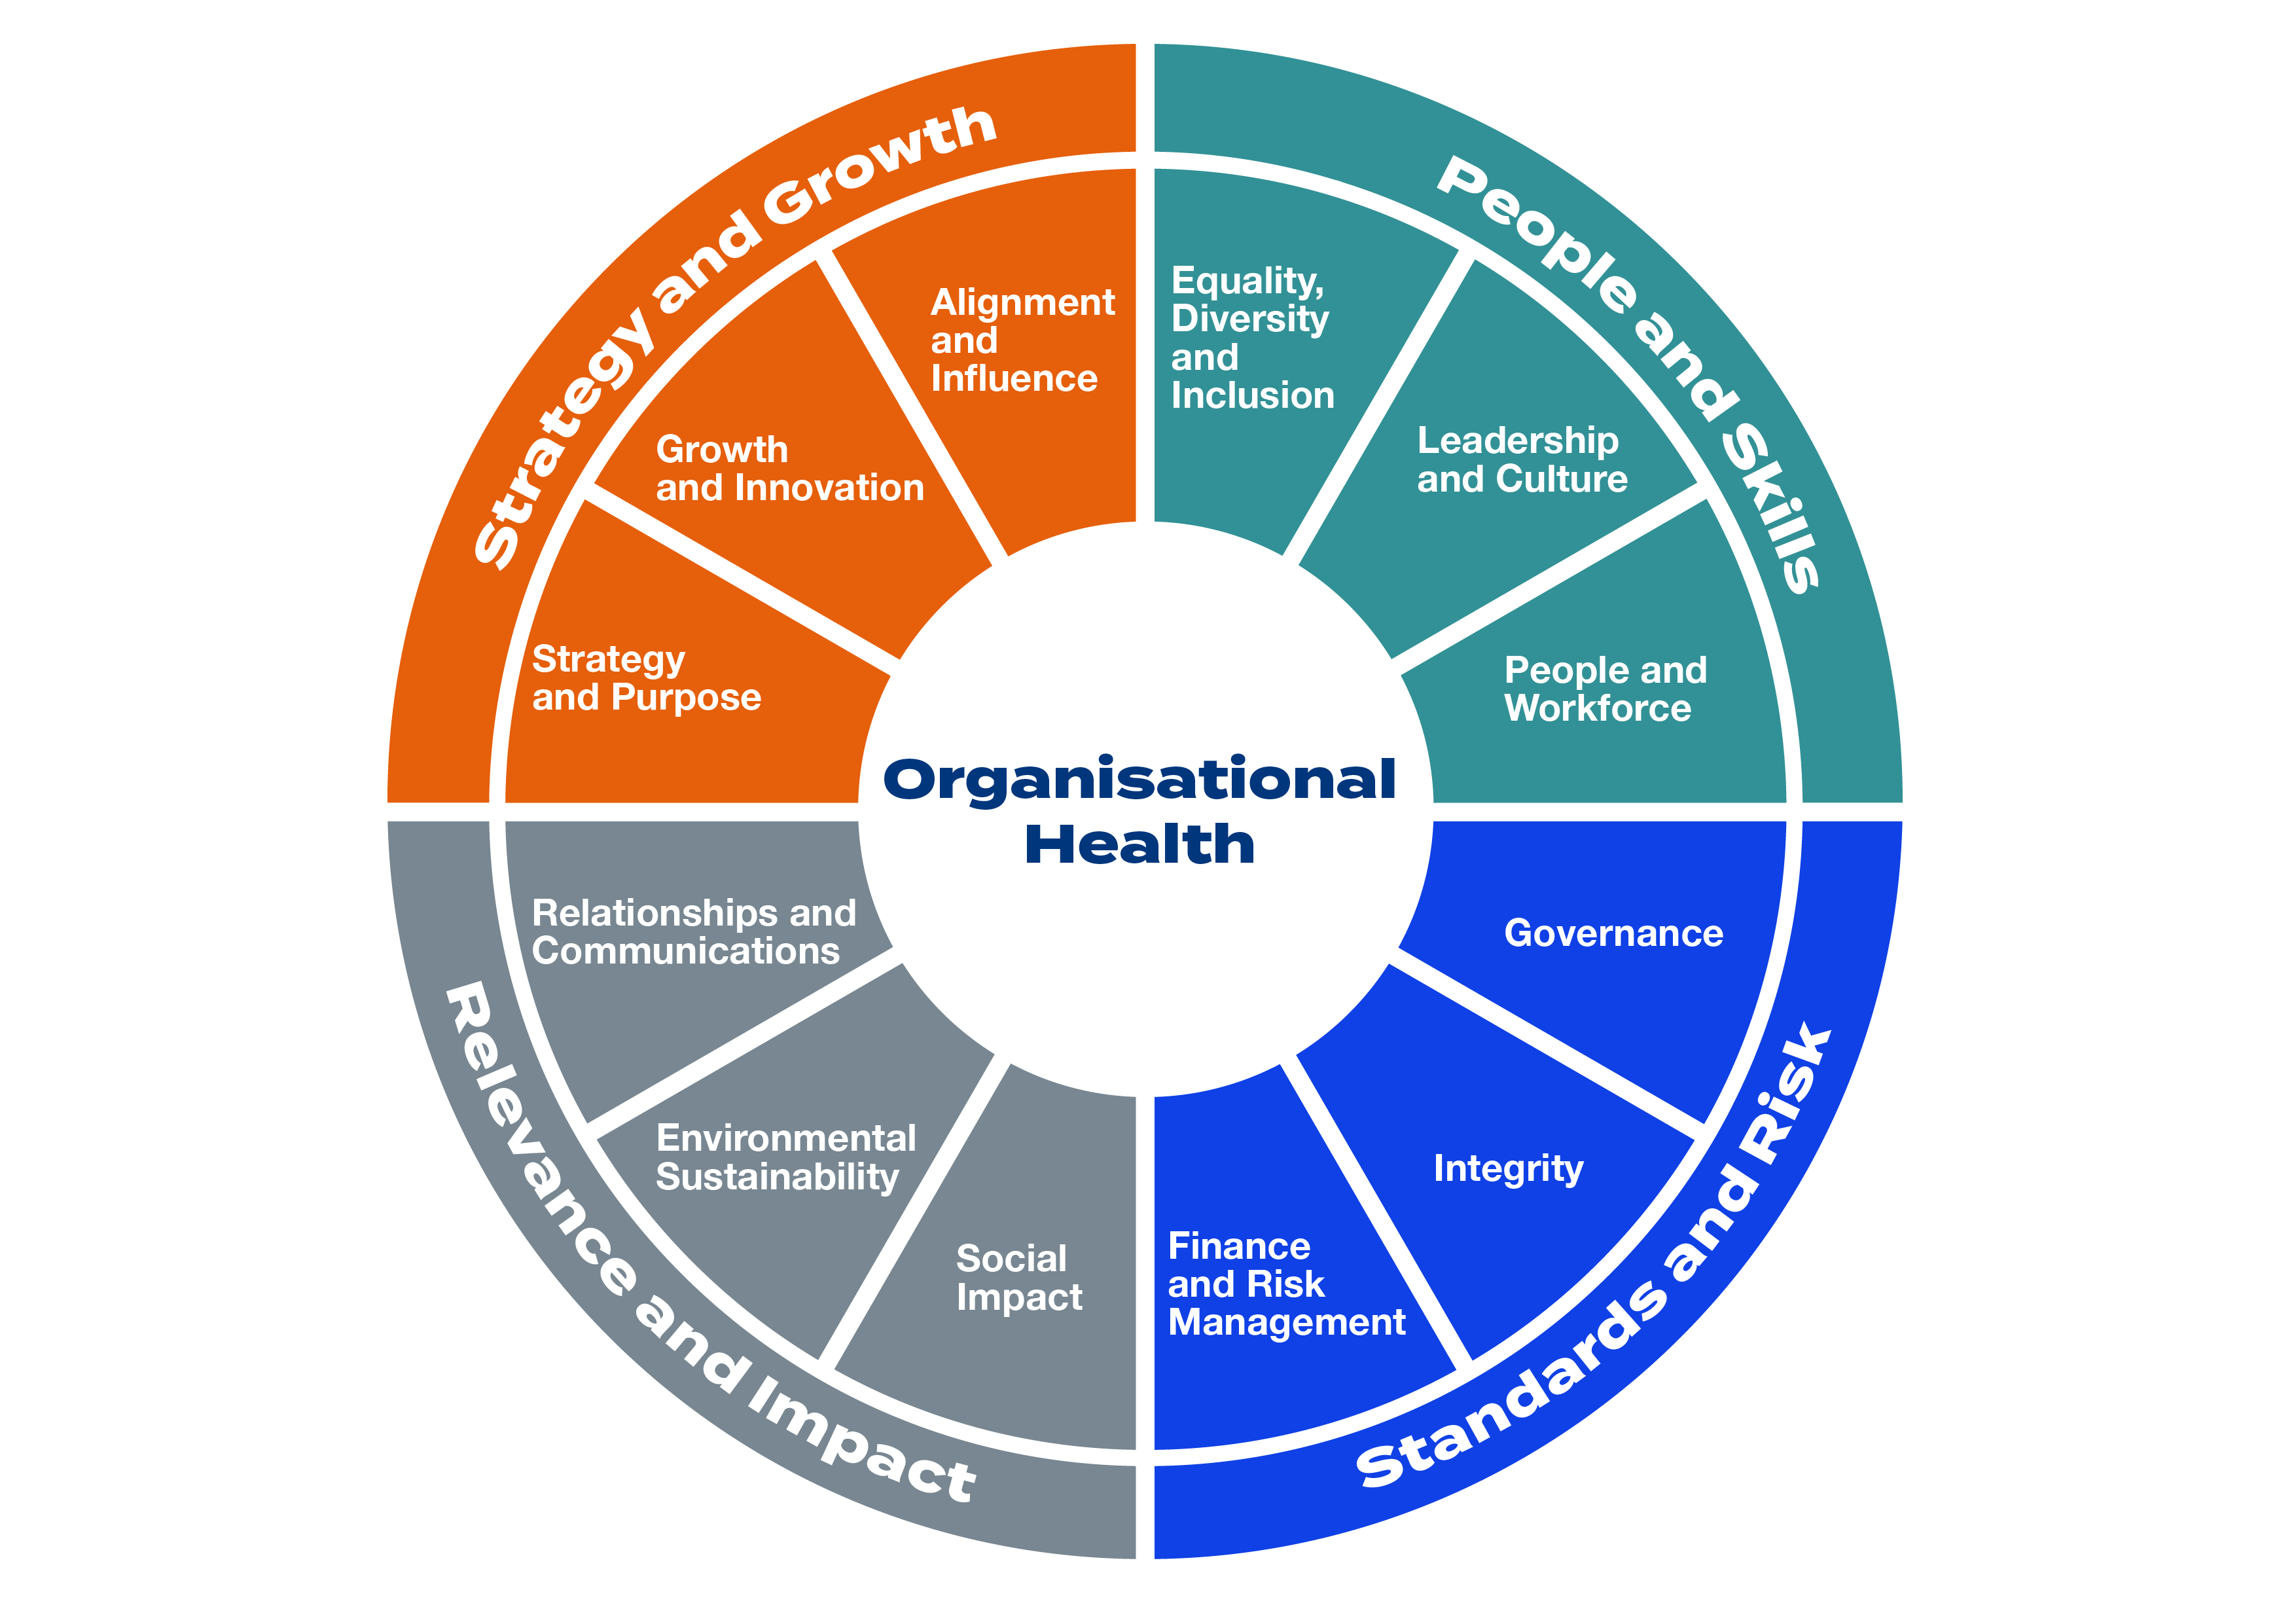 Graphic image depicting the four elements of Organisational Health